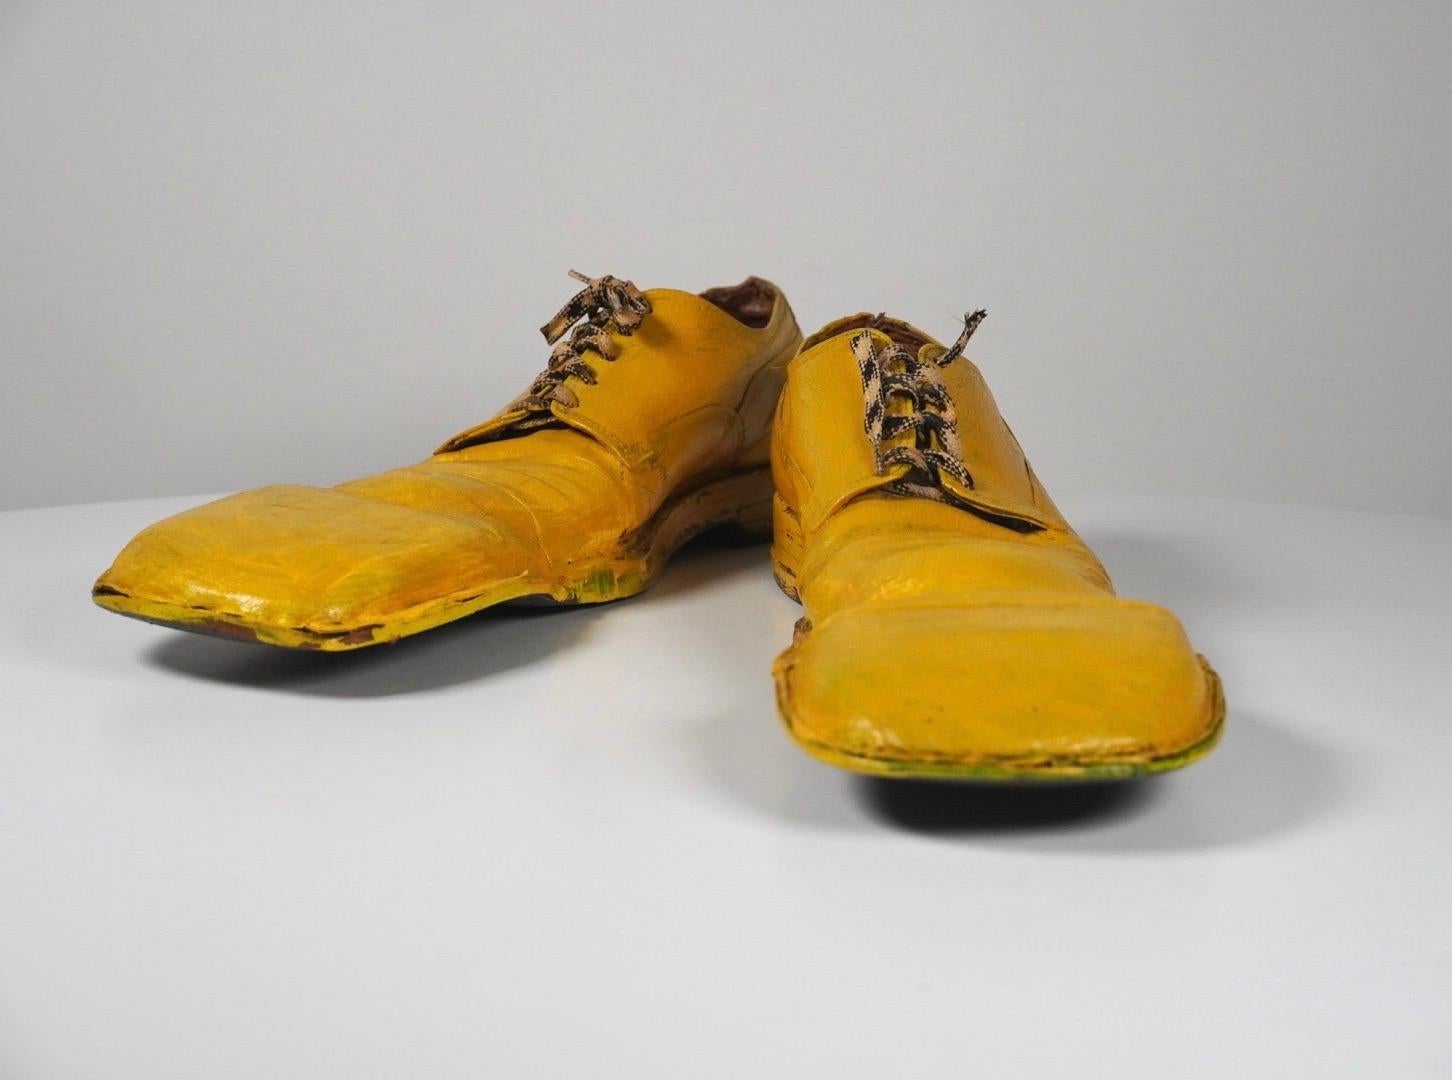 Handmade clown shoes from the 1950s in yellow leather, with lots of patina from years of use. These were a custom made shoe from a existing pair of regular street dress that have been modified to create these shoes. Because of the limited nature of